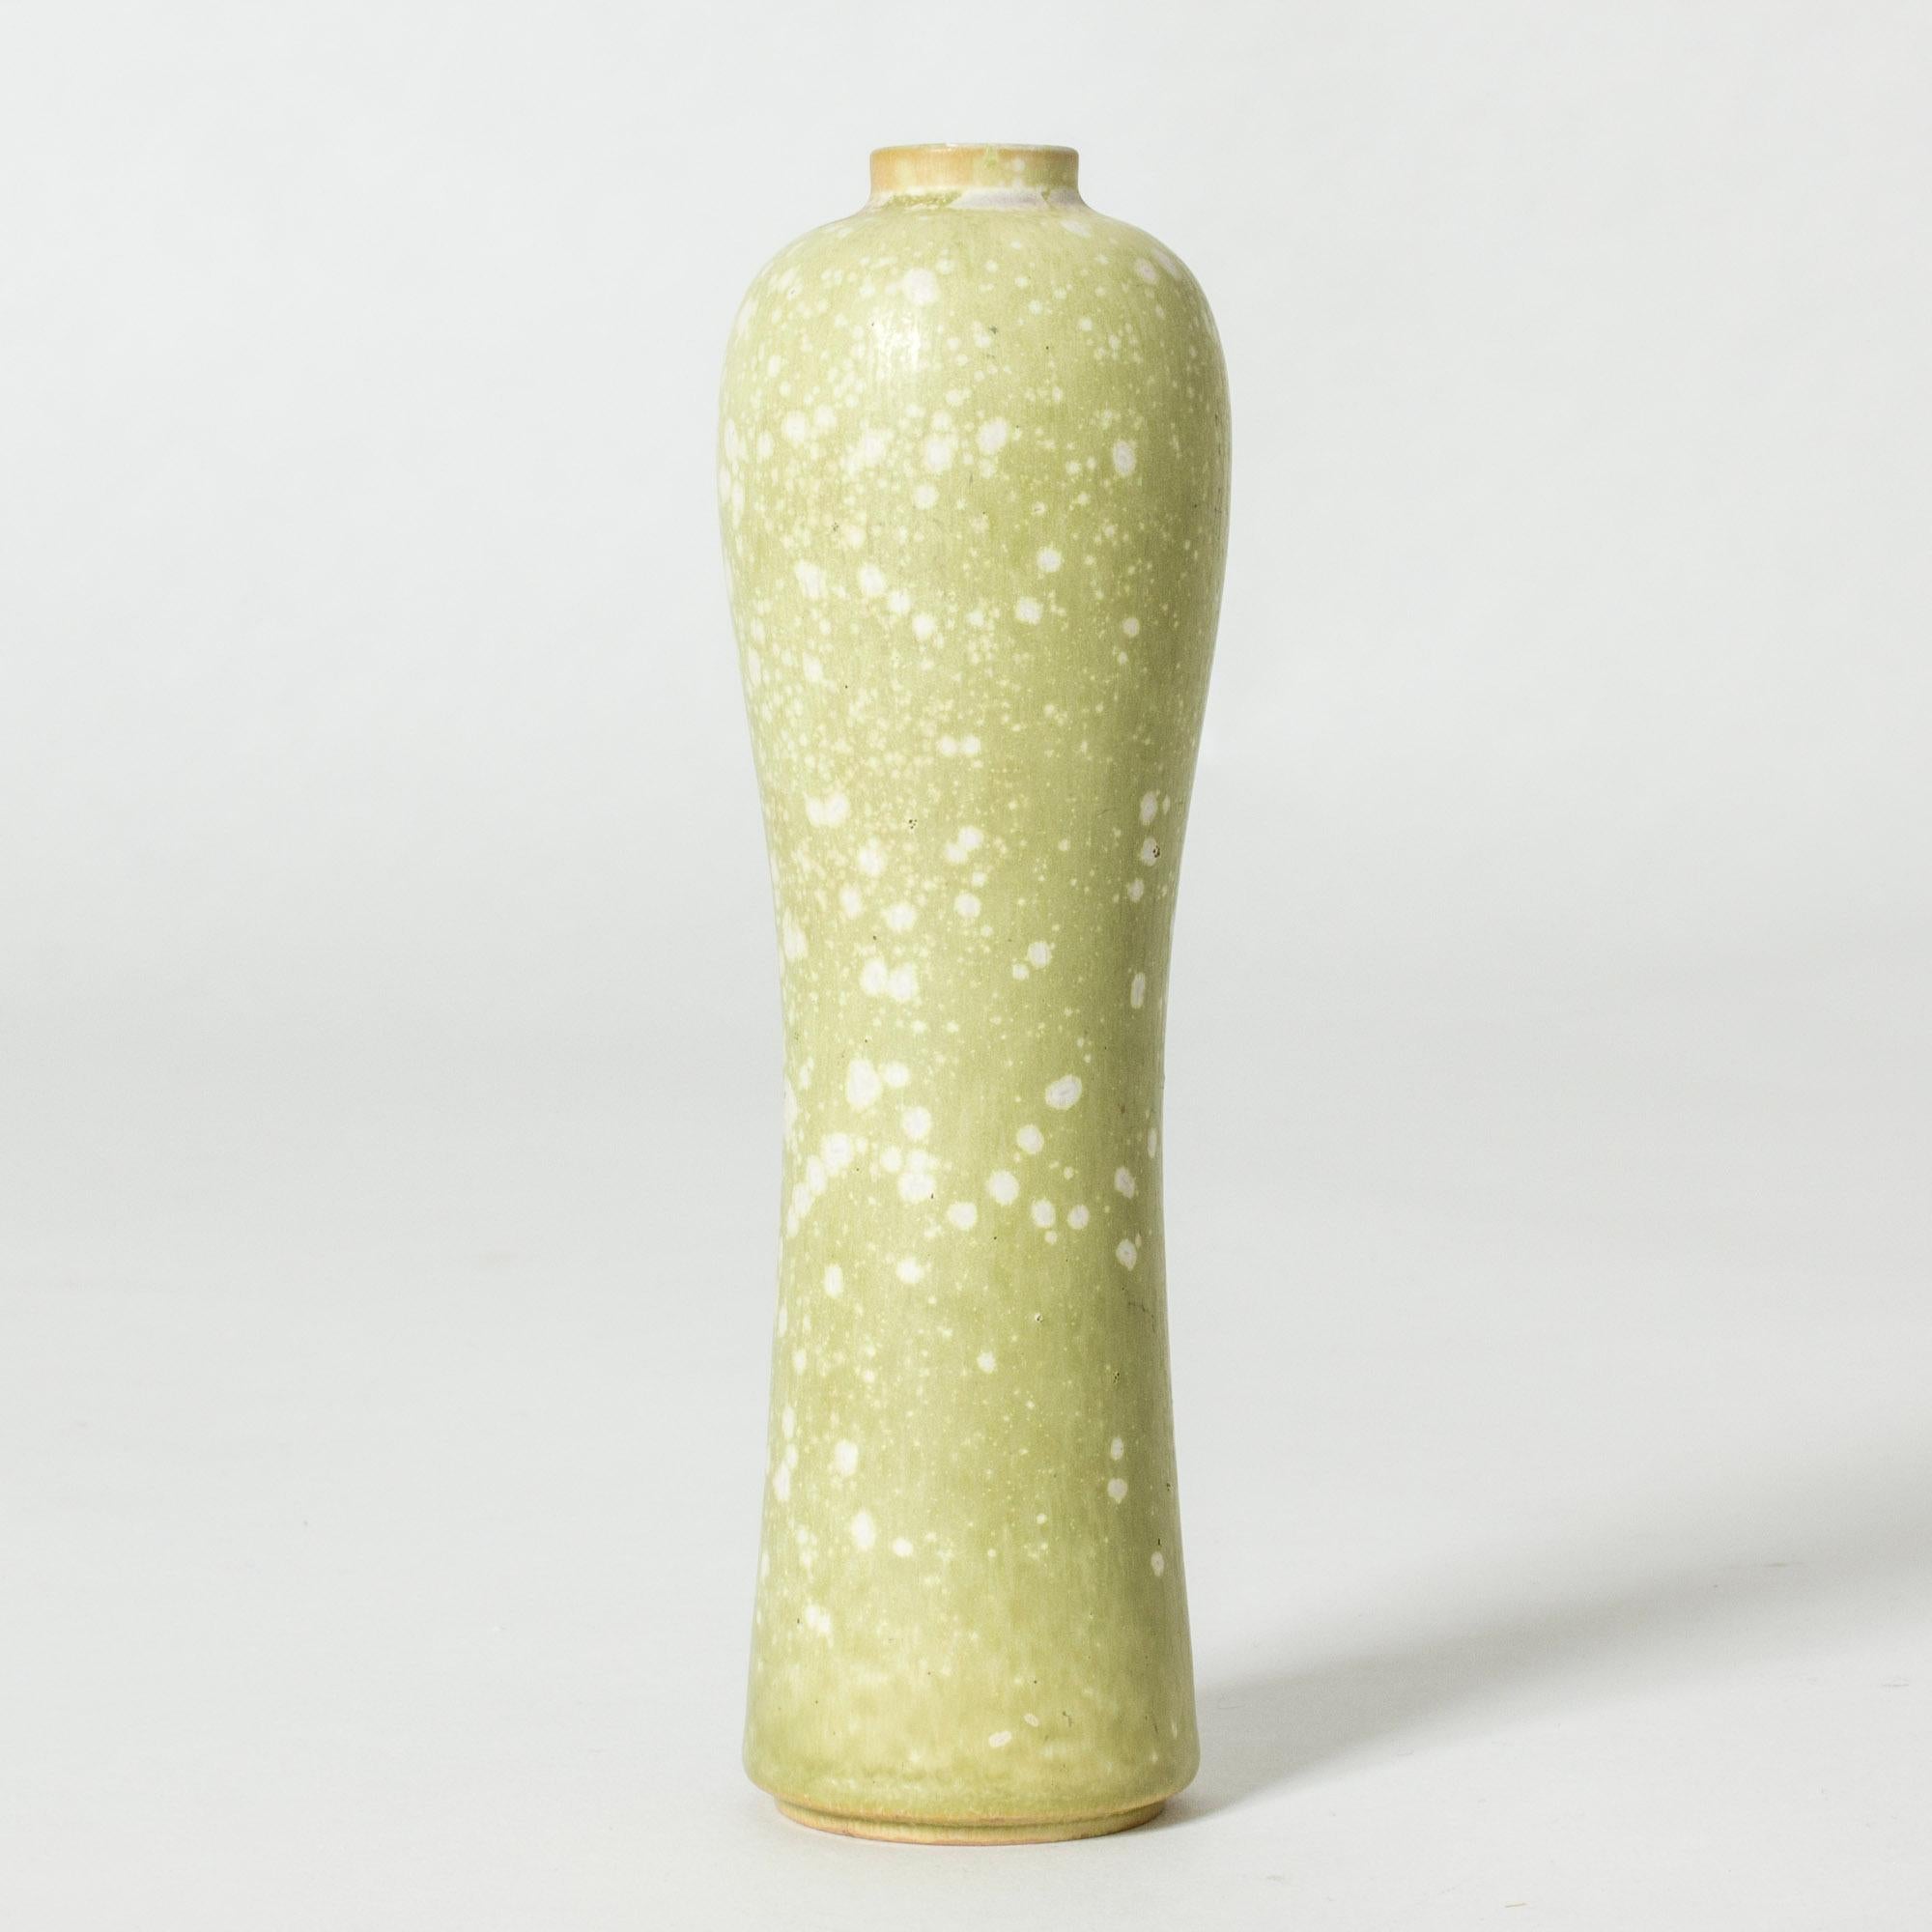 Lovely stoneware vase by Gunnar Nylund, in a curvesome, organic form form. Glazed pale green with a white “Mimosa” pattern.

Gunnar Nylund was one of the most influential ceramicists and designers of the Swedish mid-century period. He was